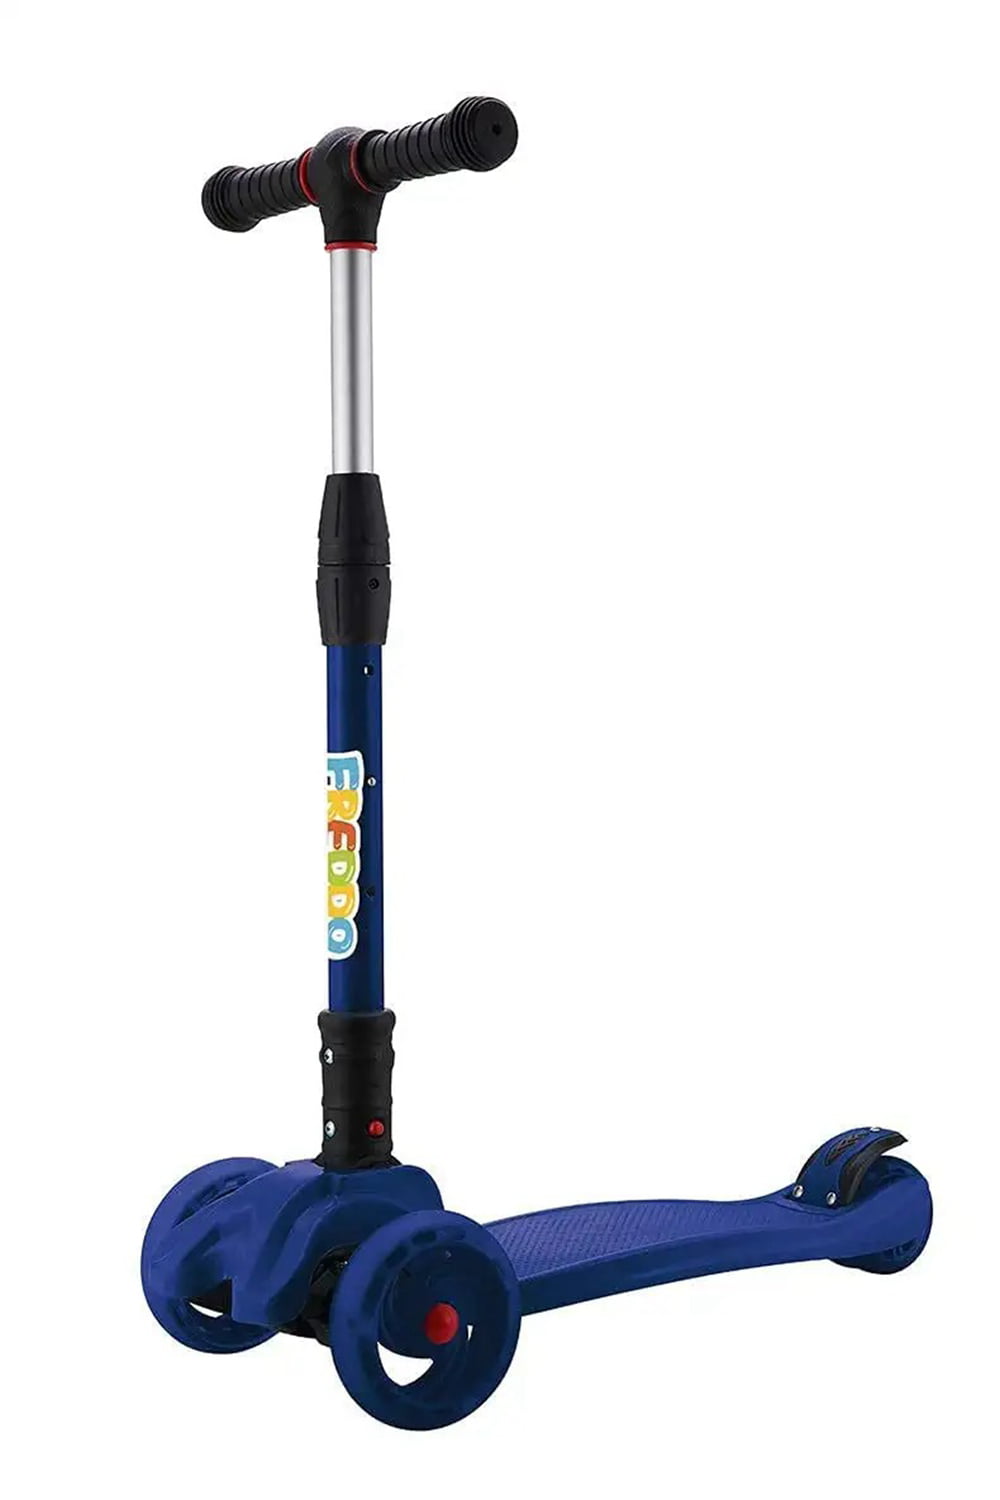 Soonbuy Kick Scooter for Kids – Foldable,Lightweight, Adjustable Height Handlebars, for Riders 3-13, and up 121 lbs,Blue,Christmas Gifts - Walmart.com